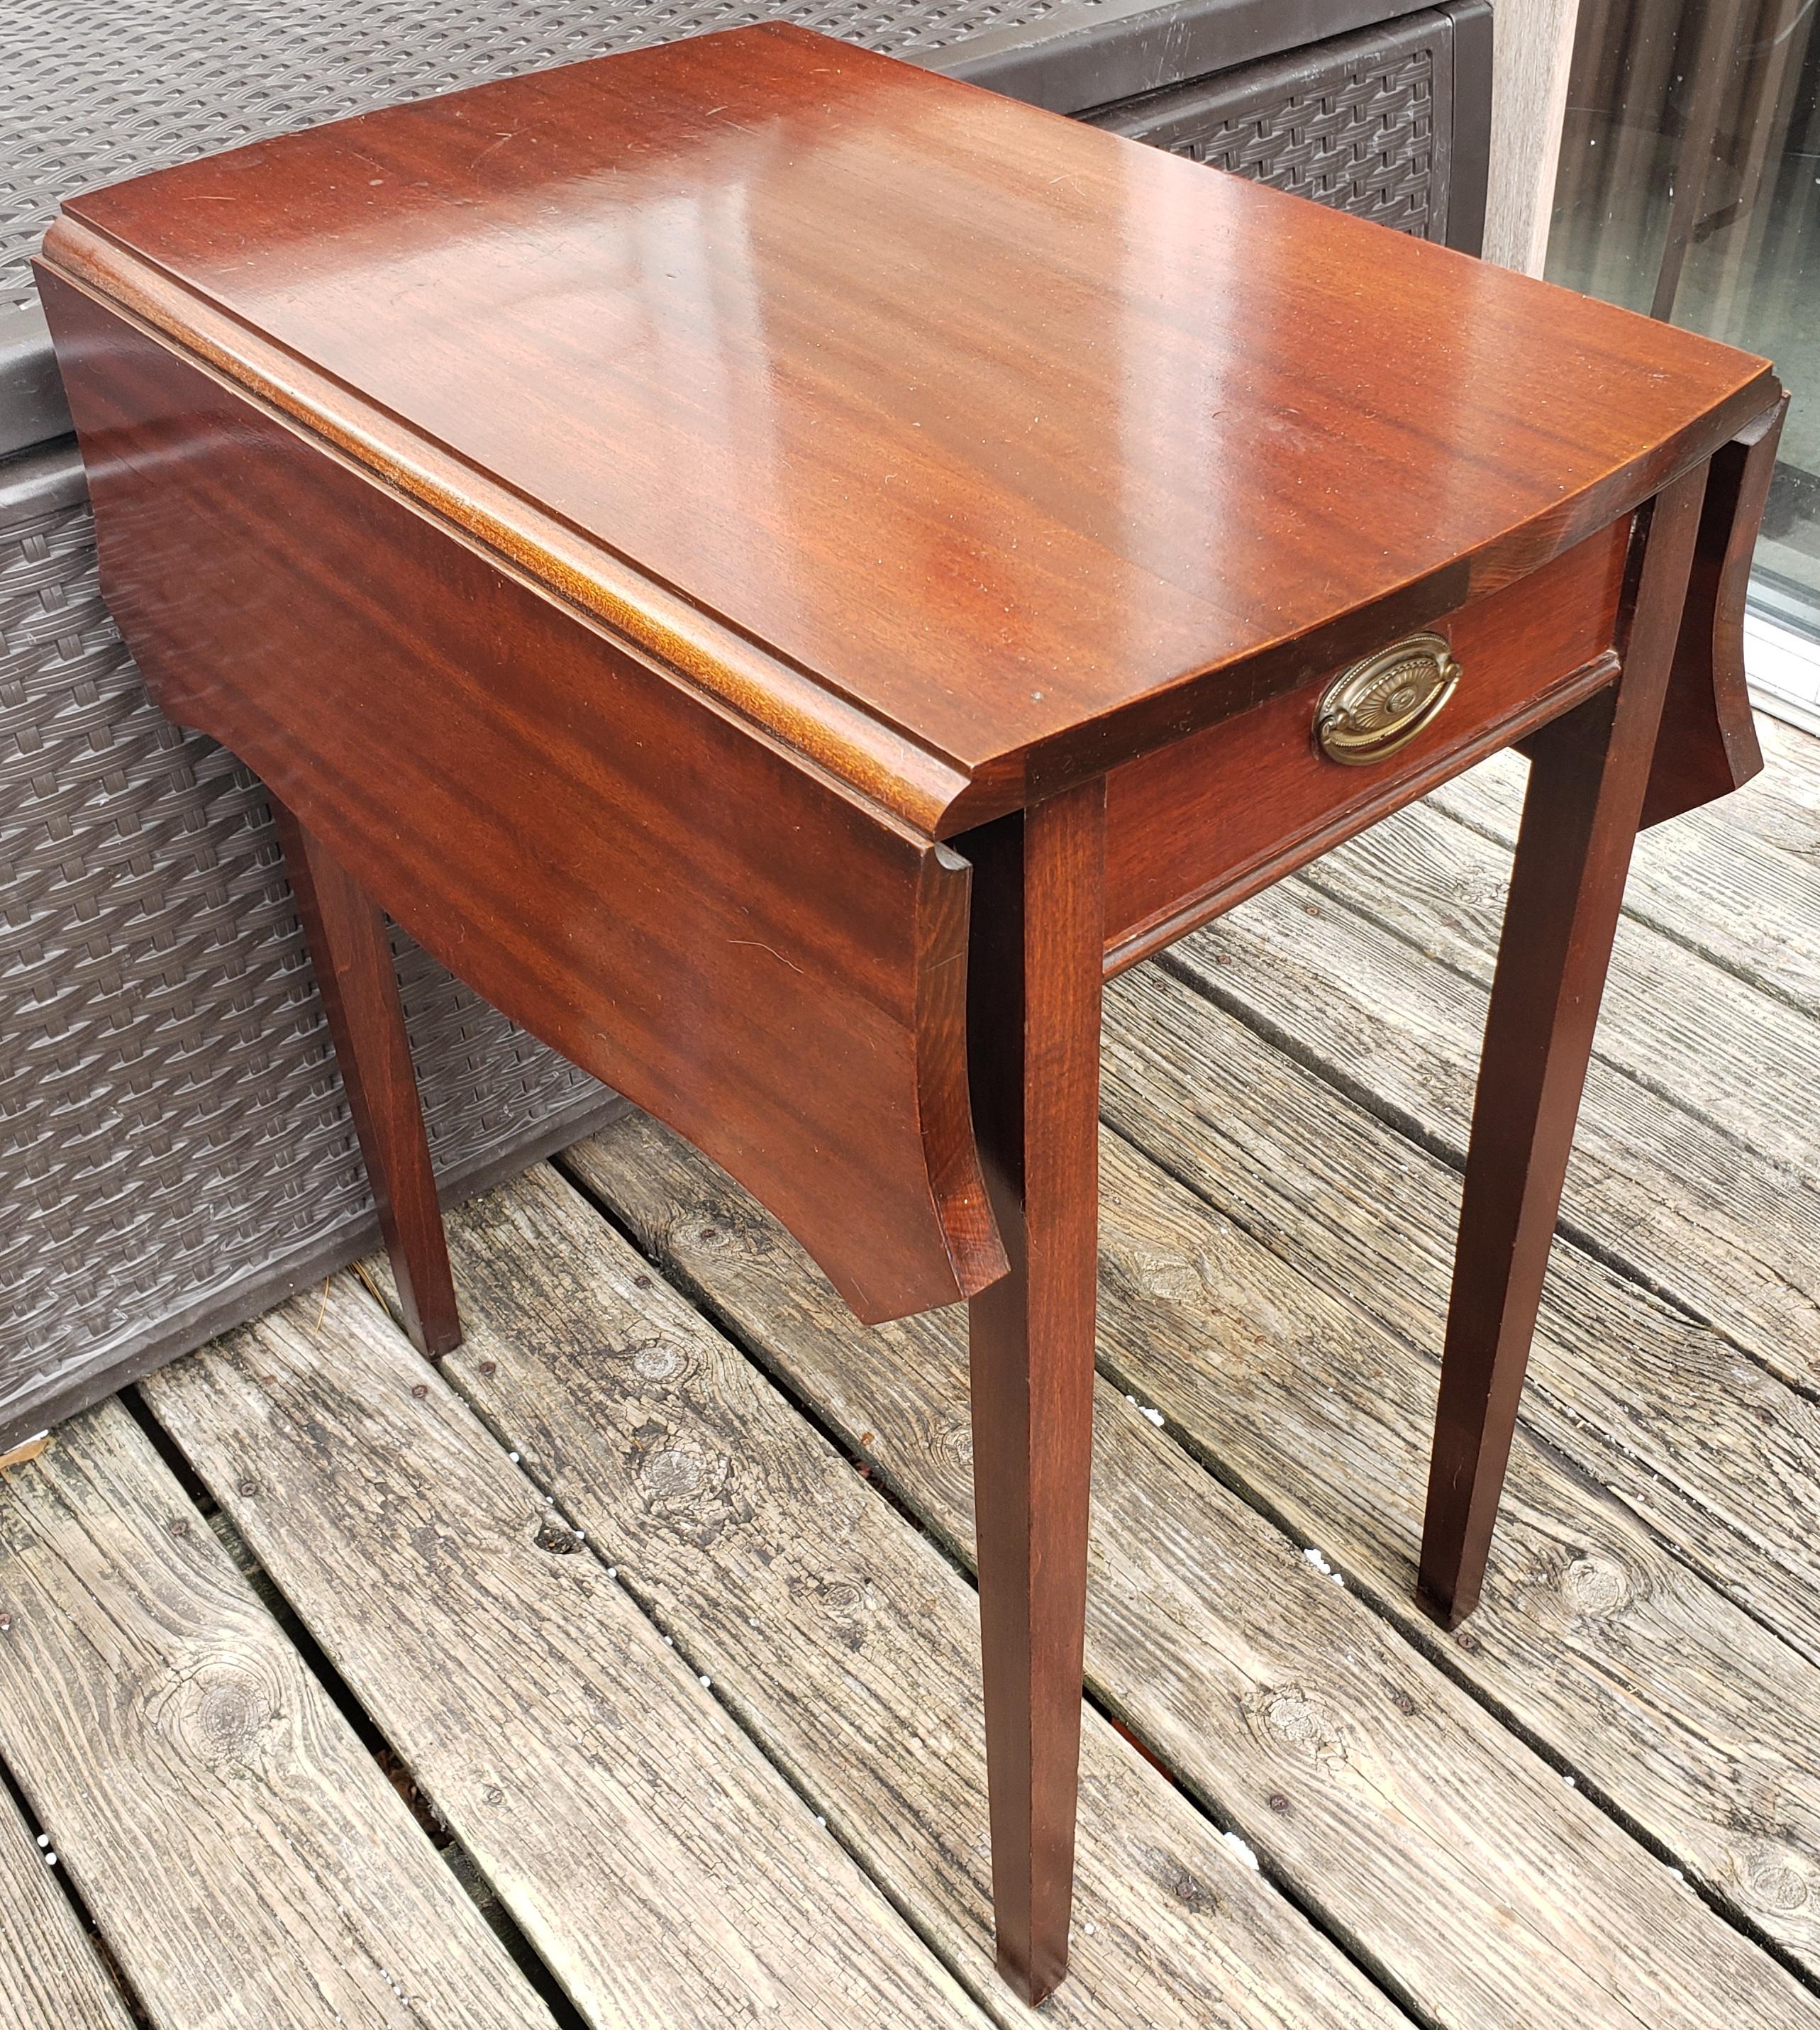 Stunning pair of Kittinger attributed mahogany Hepplewhite Pembroke tables. Very nice wood grain and patina with dovetailed drawer. Excellent drop leaf mechanism and original hardware. Beautiful vintage condition. Measures 15.5